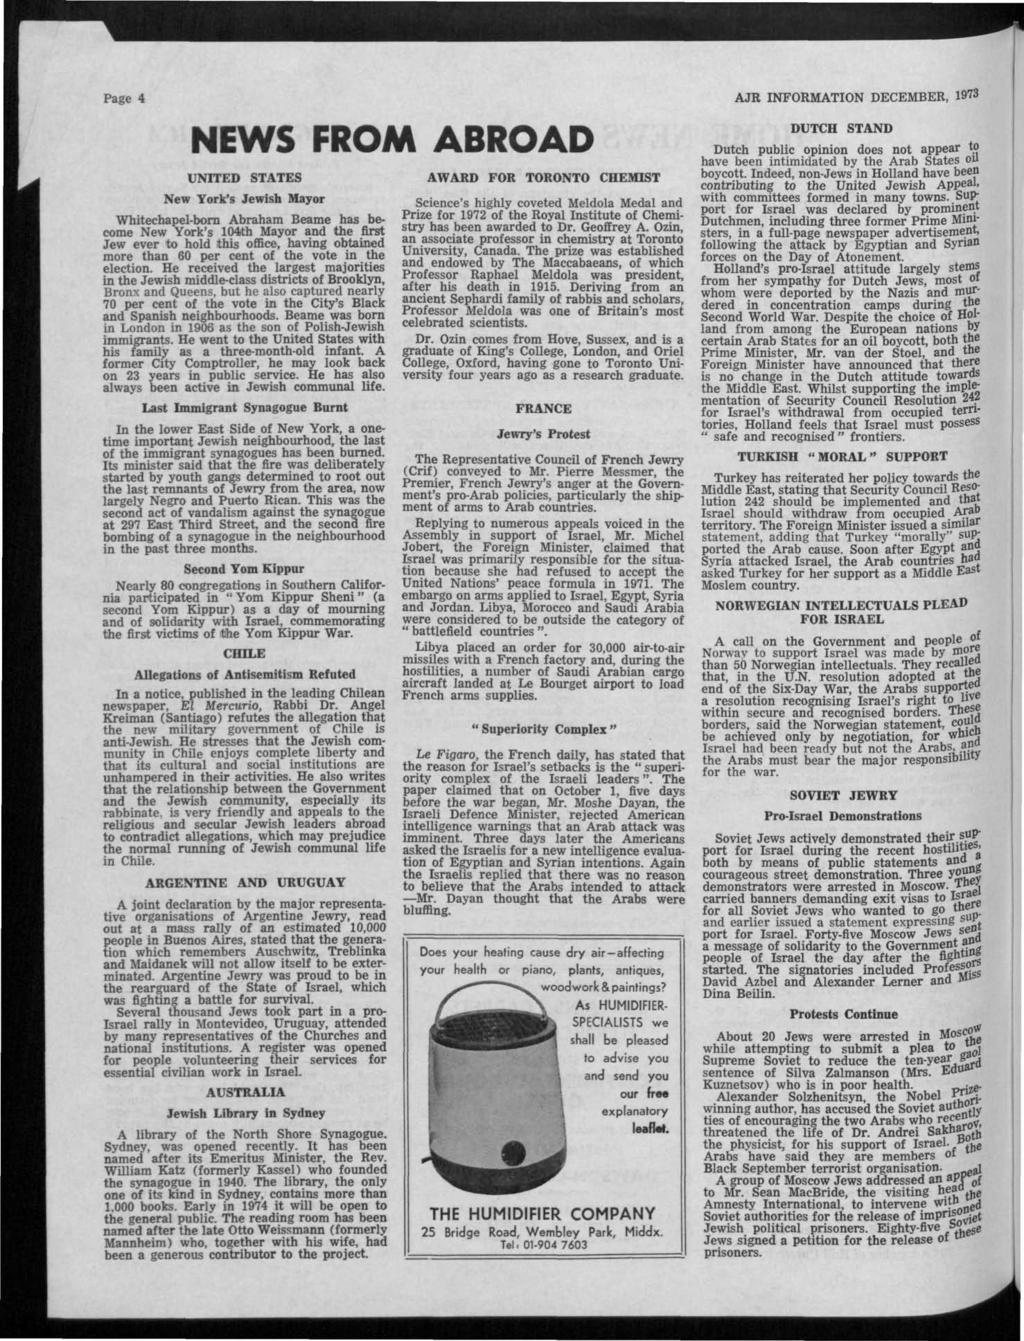 Page 4 AJR INFORMATION DECEMBER, 1973 NEWS FROM ABROAD UNITED STATES New York's Jewish Mayor Whitechapel-bom Abraham Beame has become New York's 104th Mayor and the first Jew ever to hold this